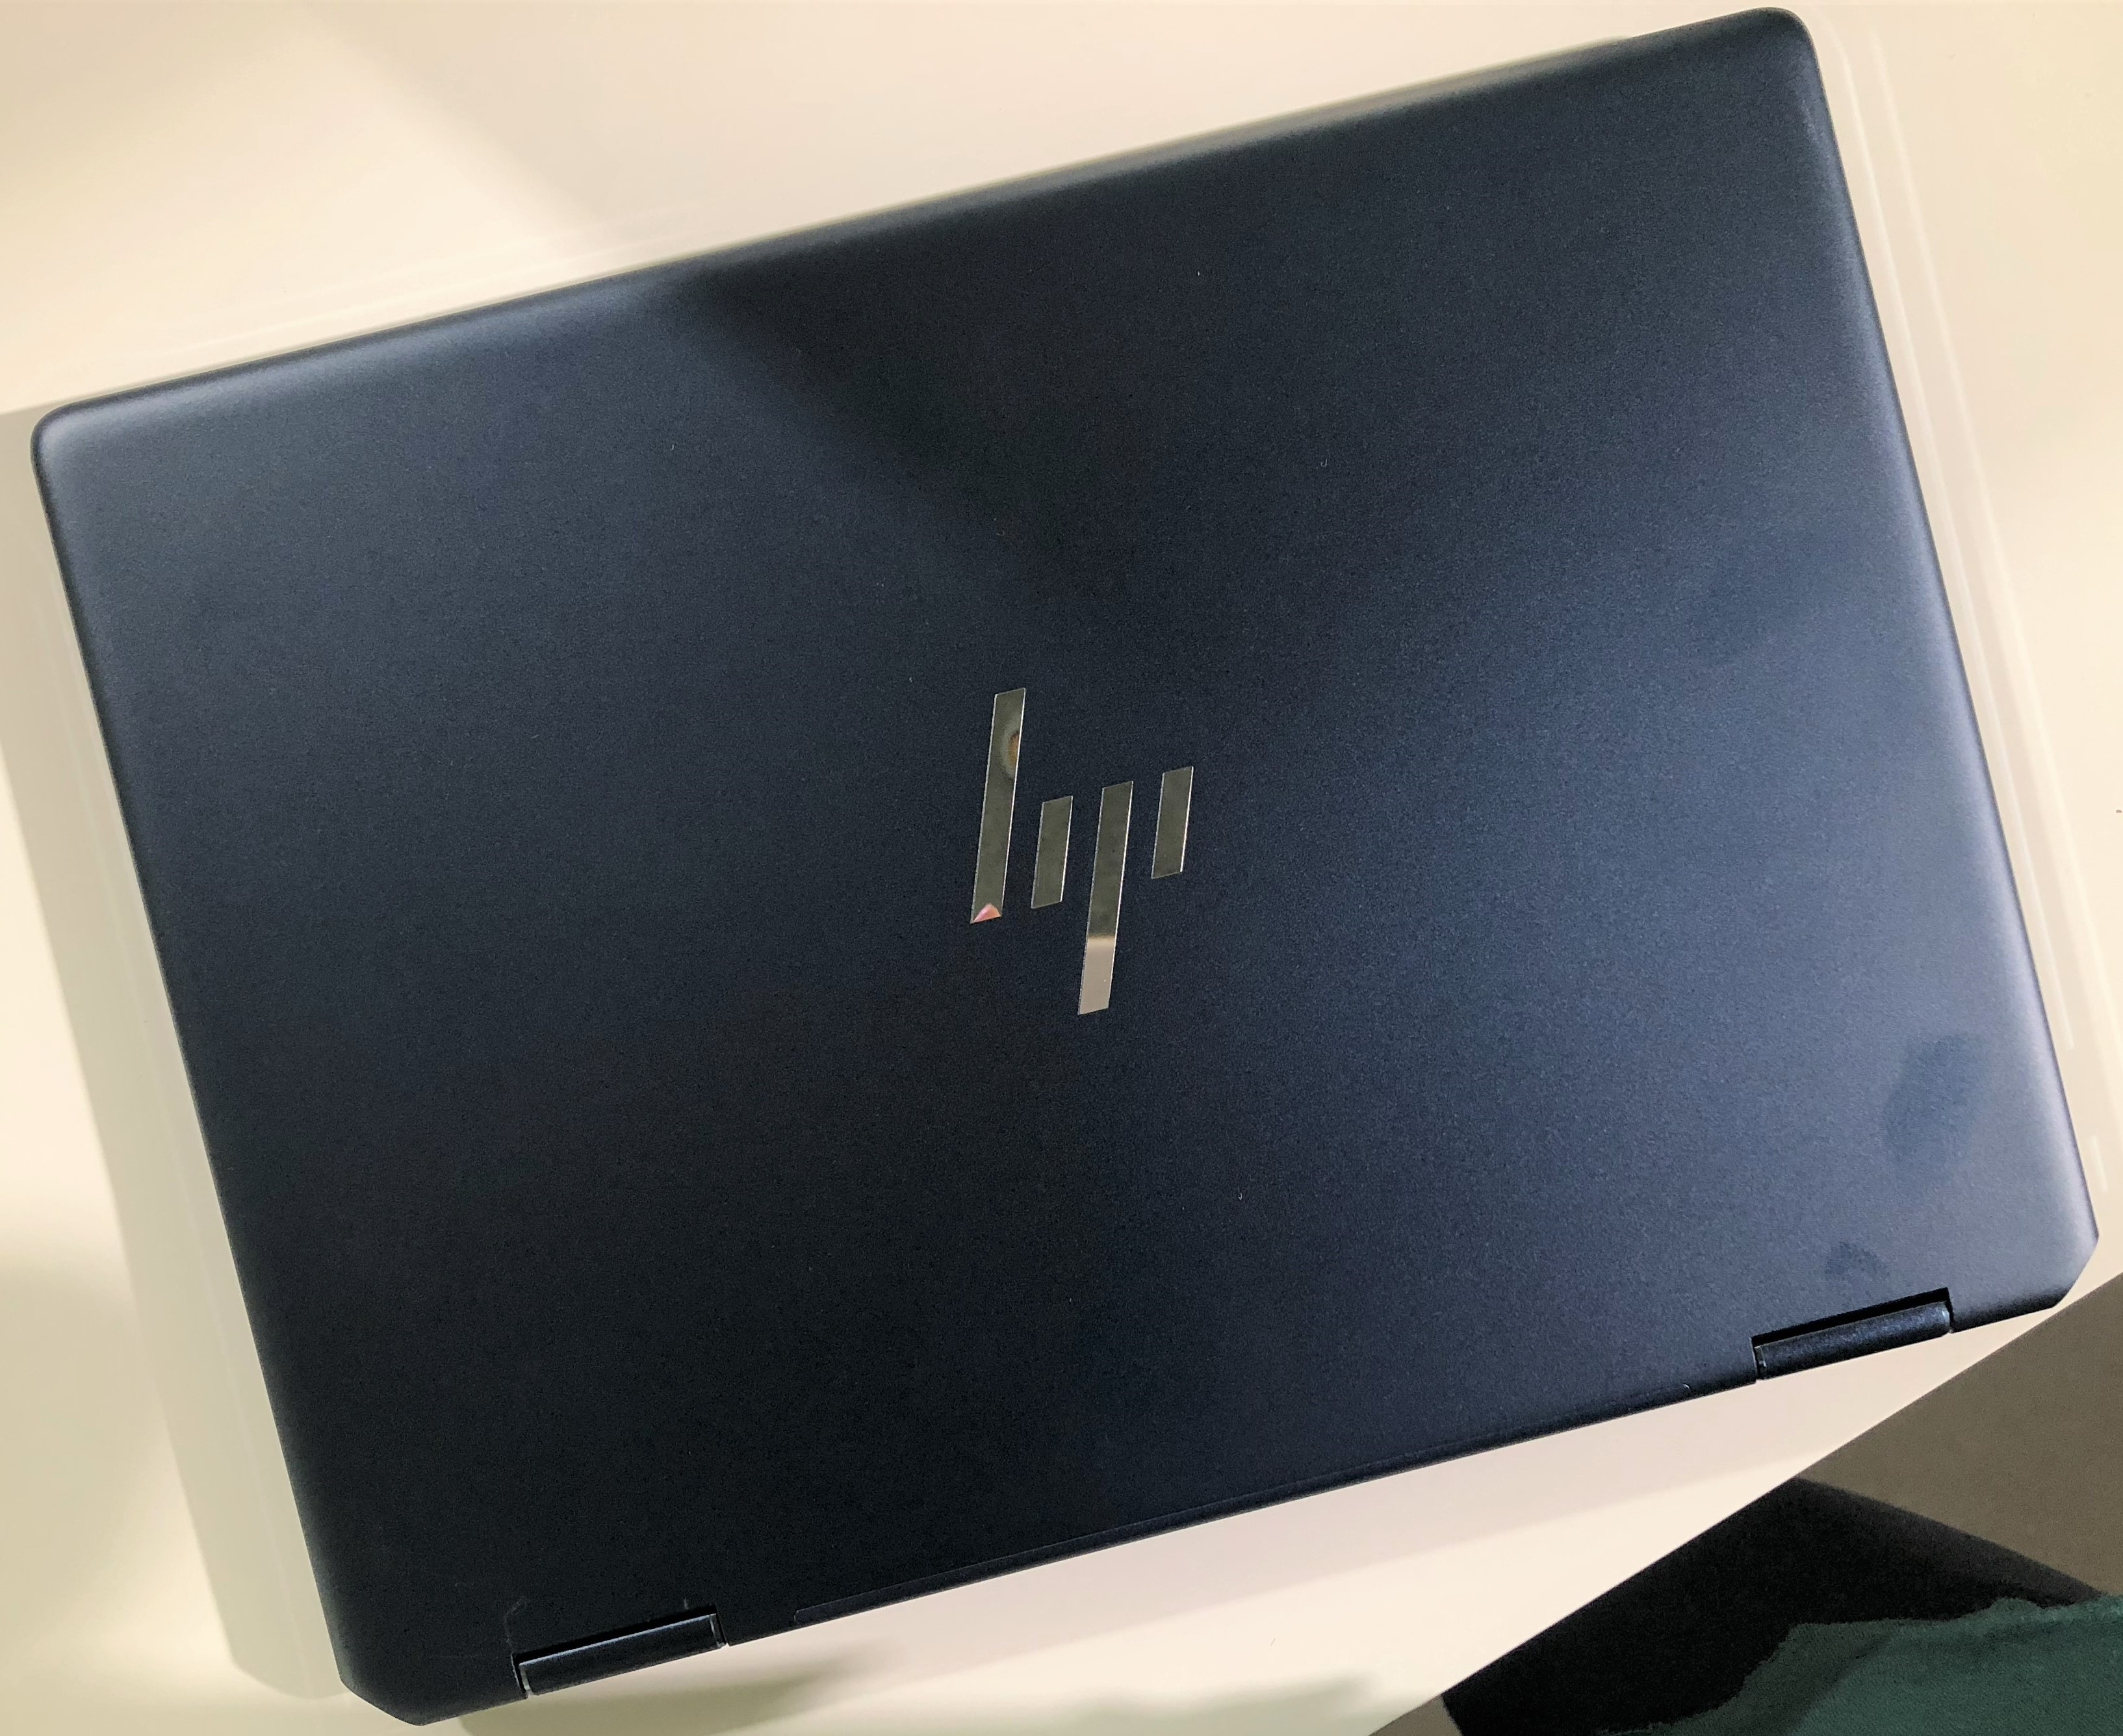 HP’s new Spectre laptops include options with Intel Arc, less noise